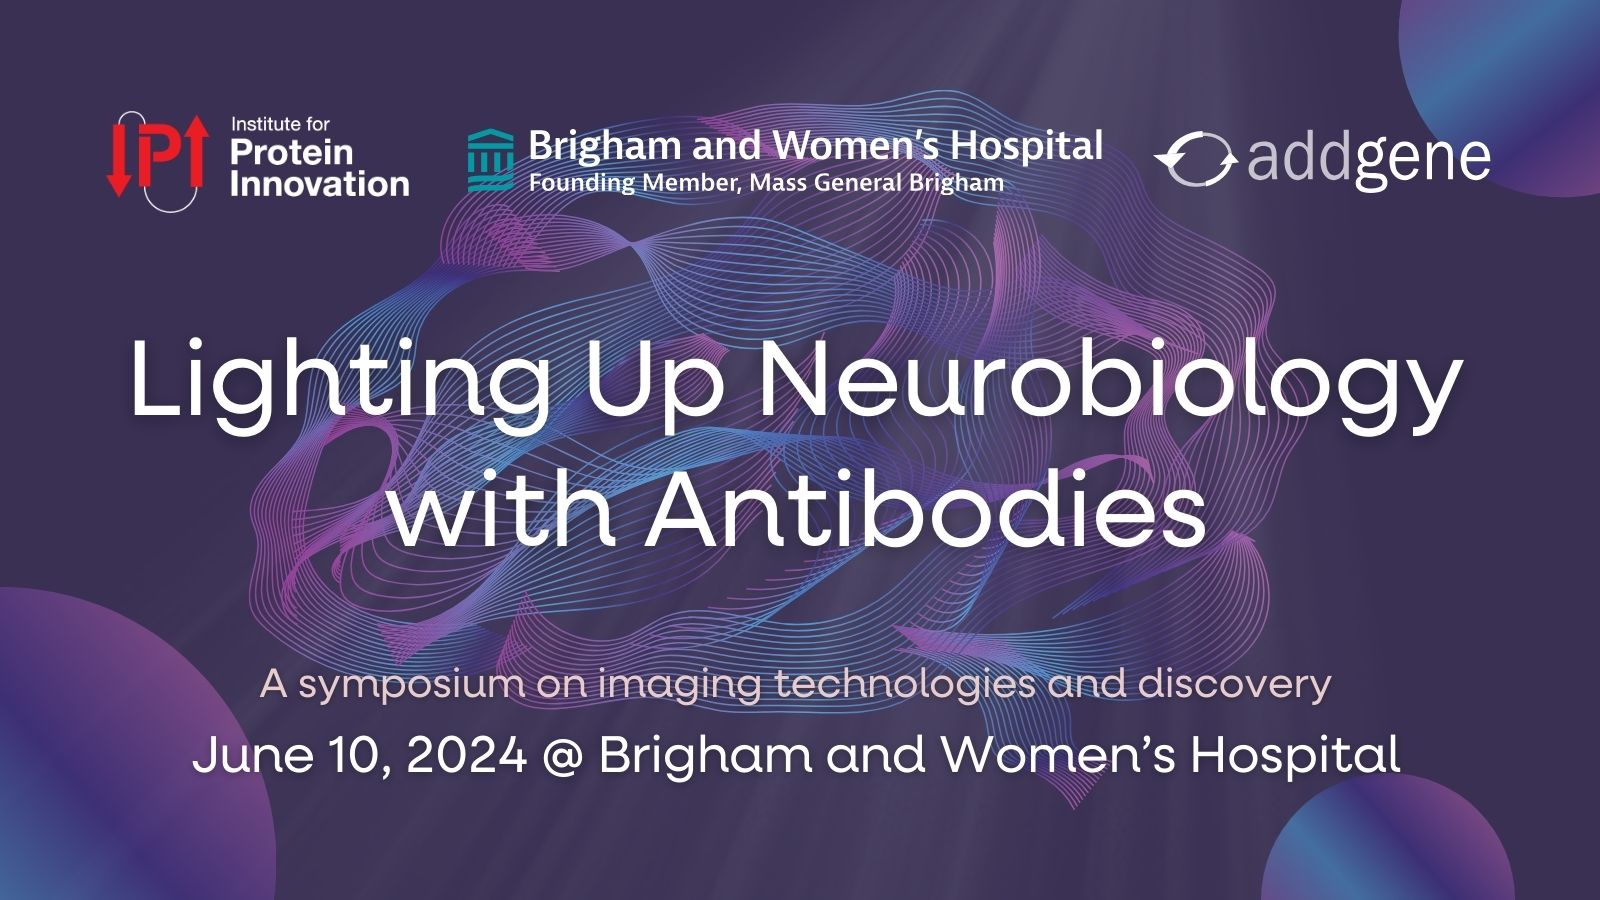 Symposium poster with text "Lighting Up Neurobiology with Antibodies: A symposium on imaging technologies and discover. June 10, 2024 @ Brigham and Women's Hospital."